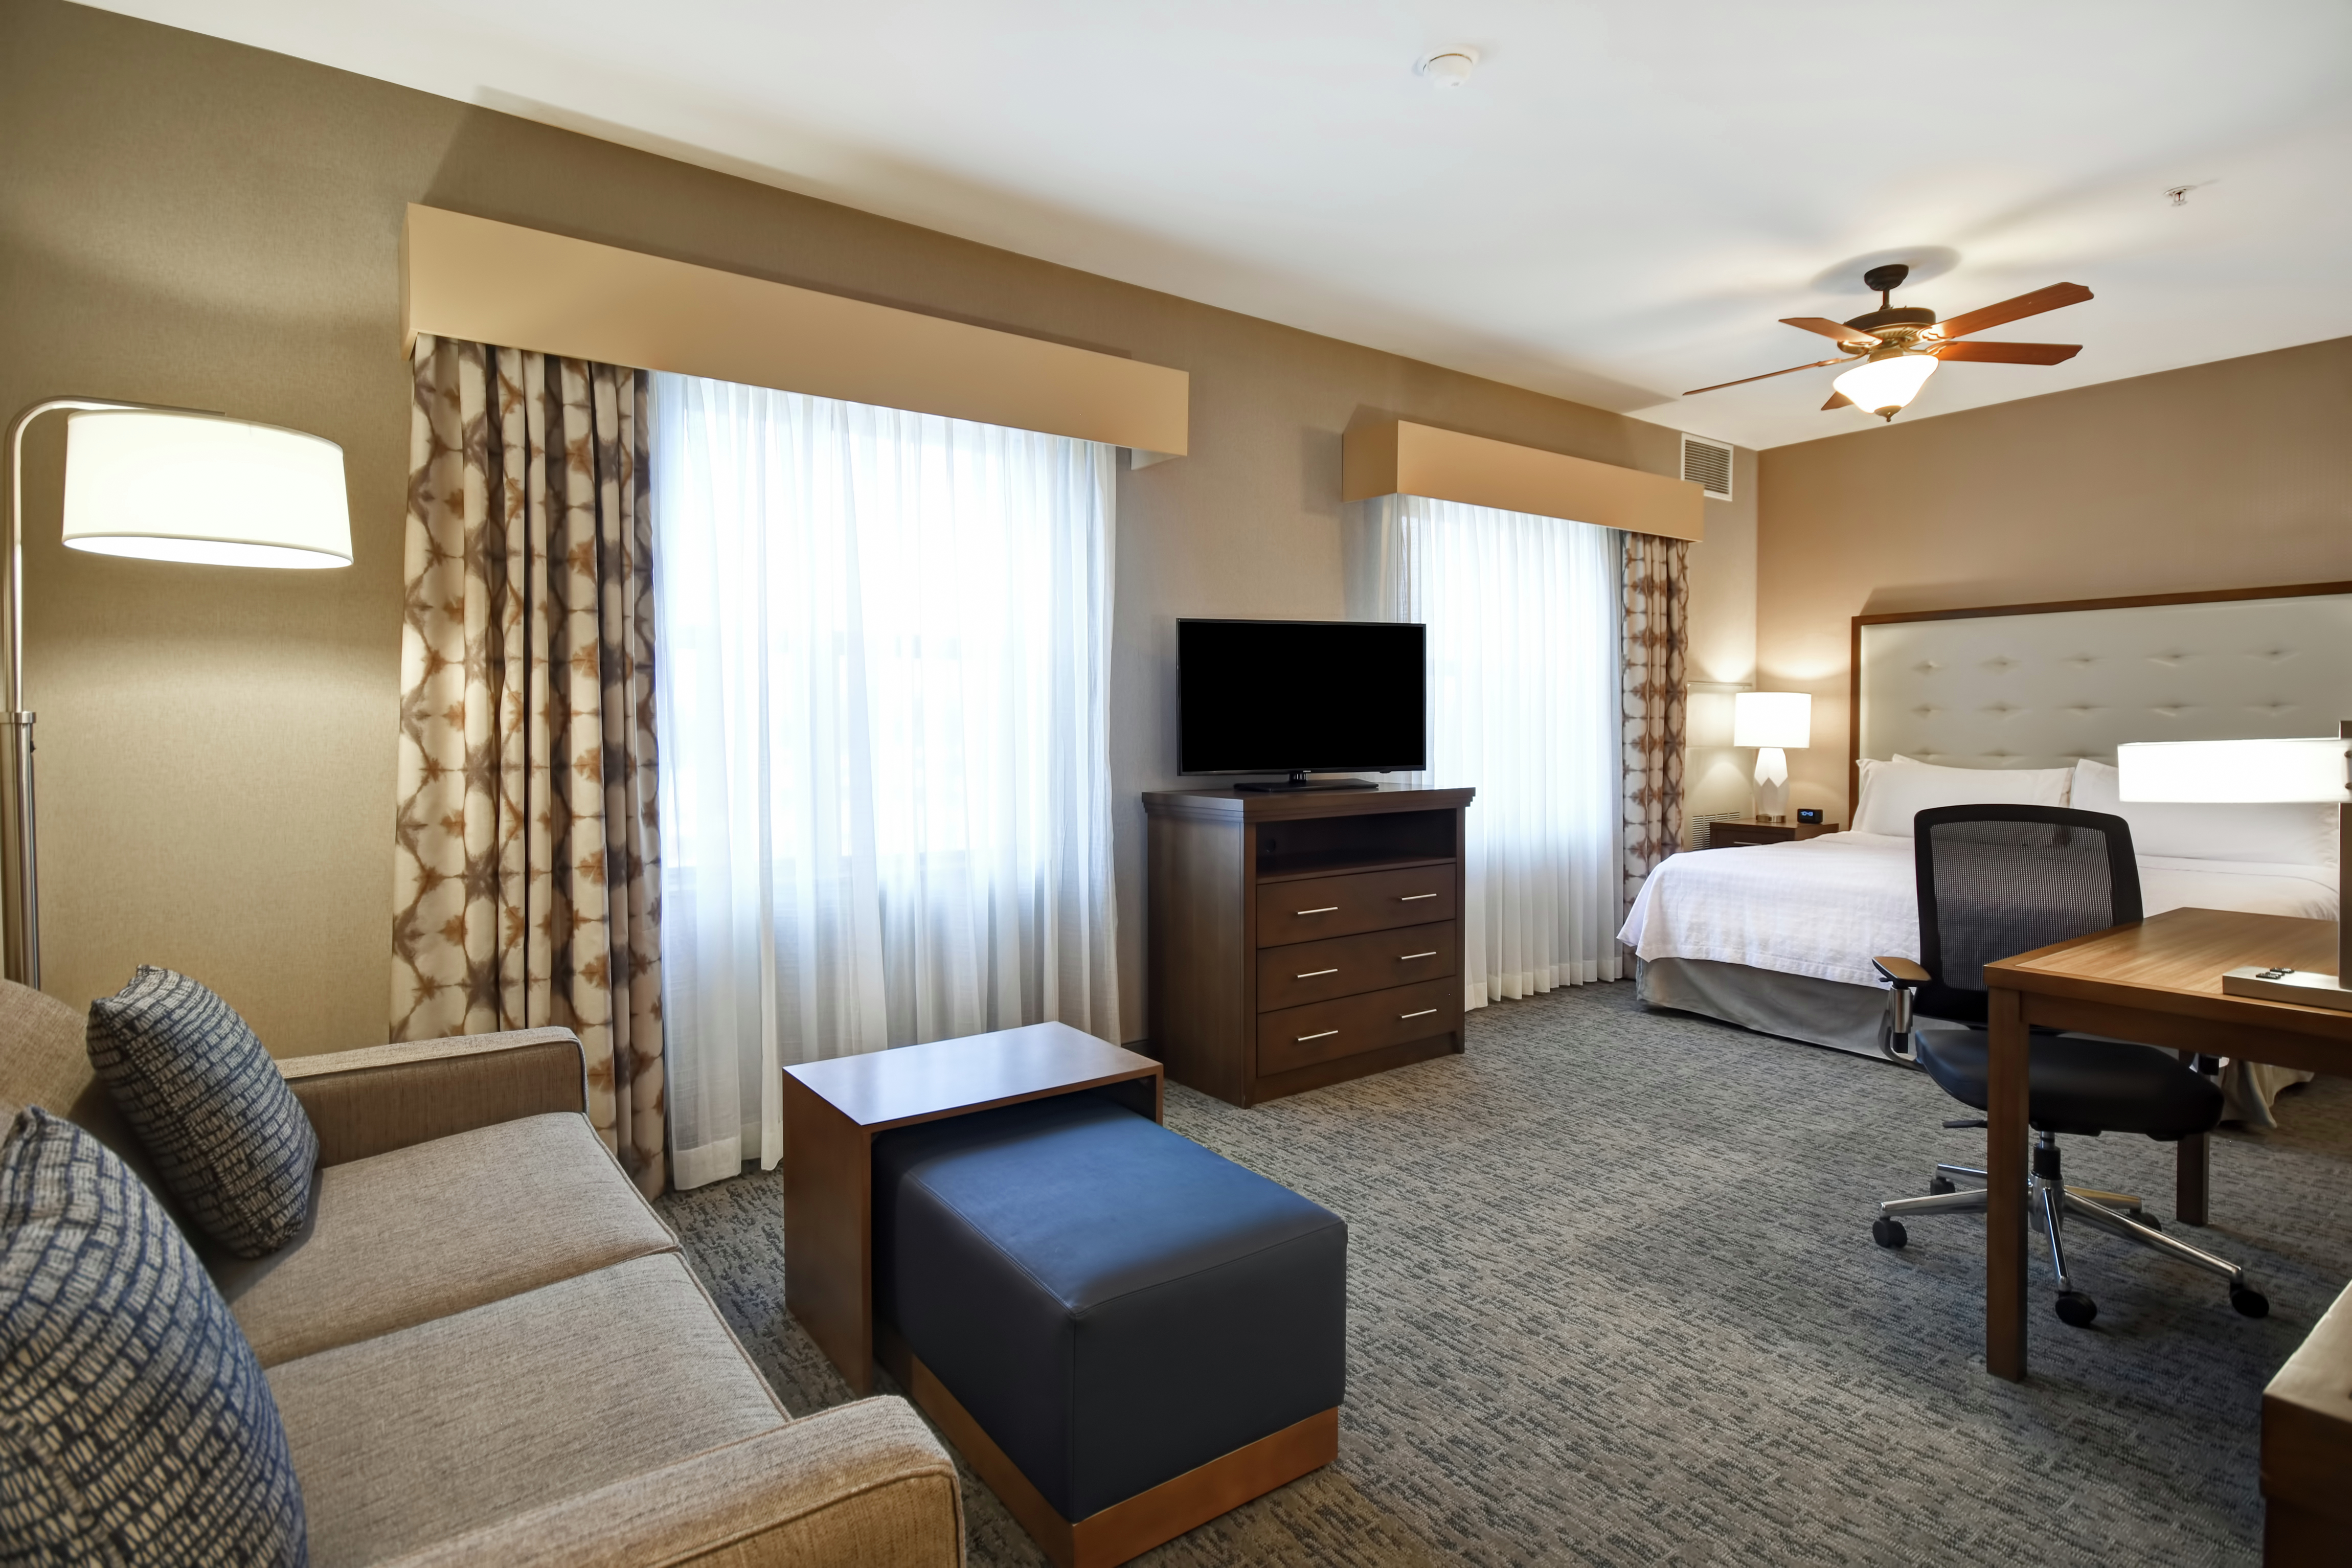 Lounge Area, TV, Work Desk, and Bed in Guest Suite